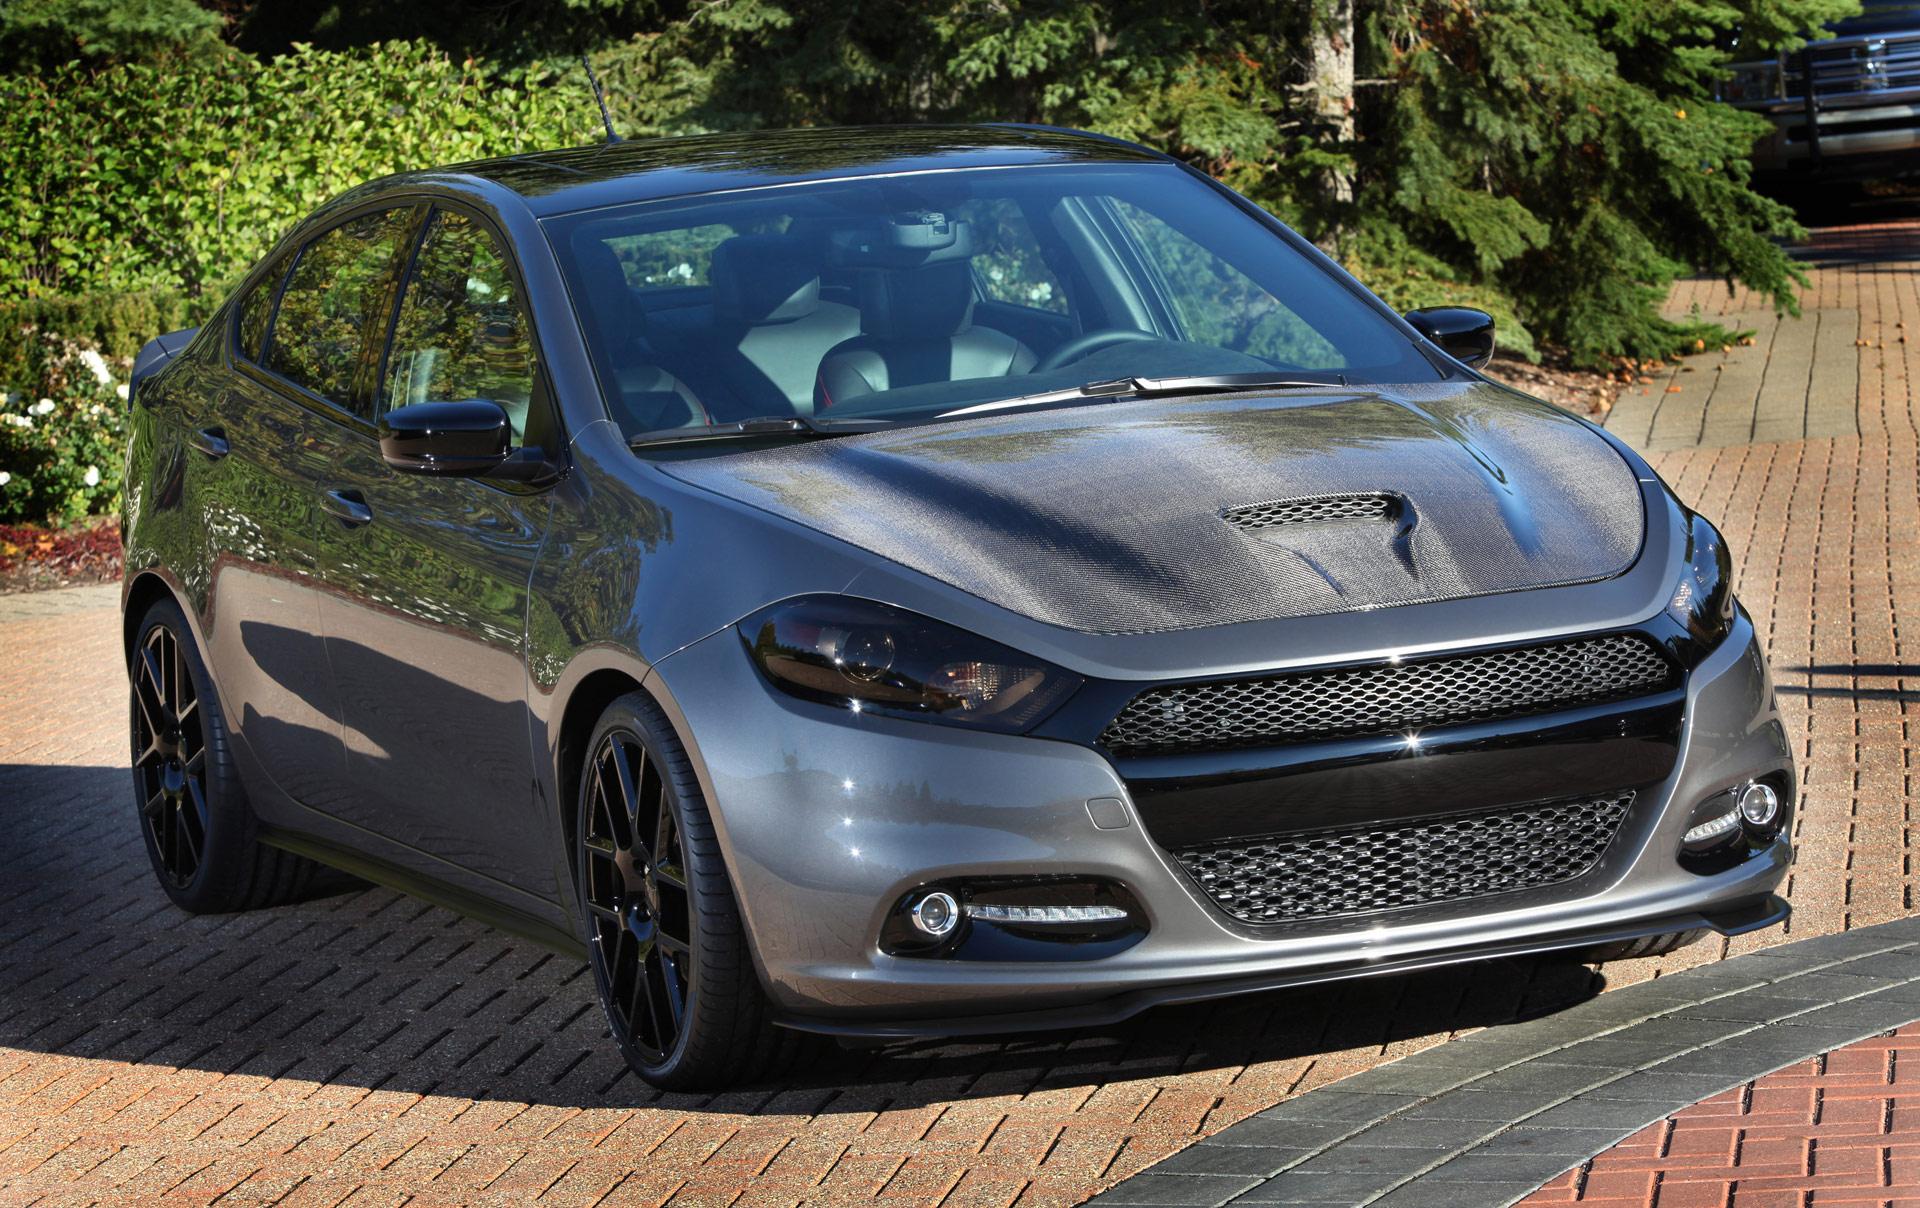 Dodge Dart Carbon Fire Wallpaper and Image Gallery